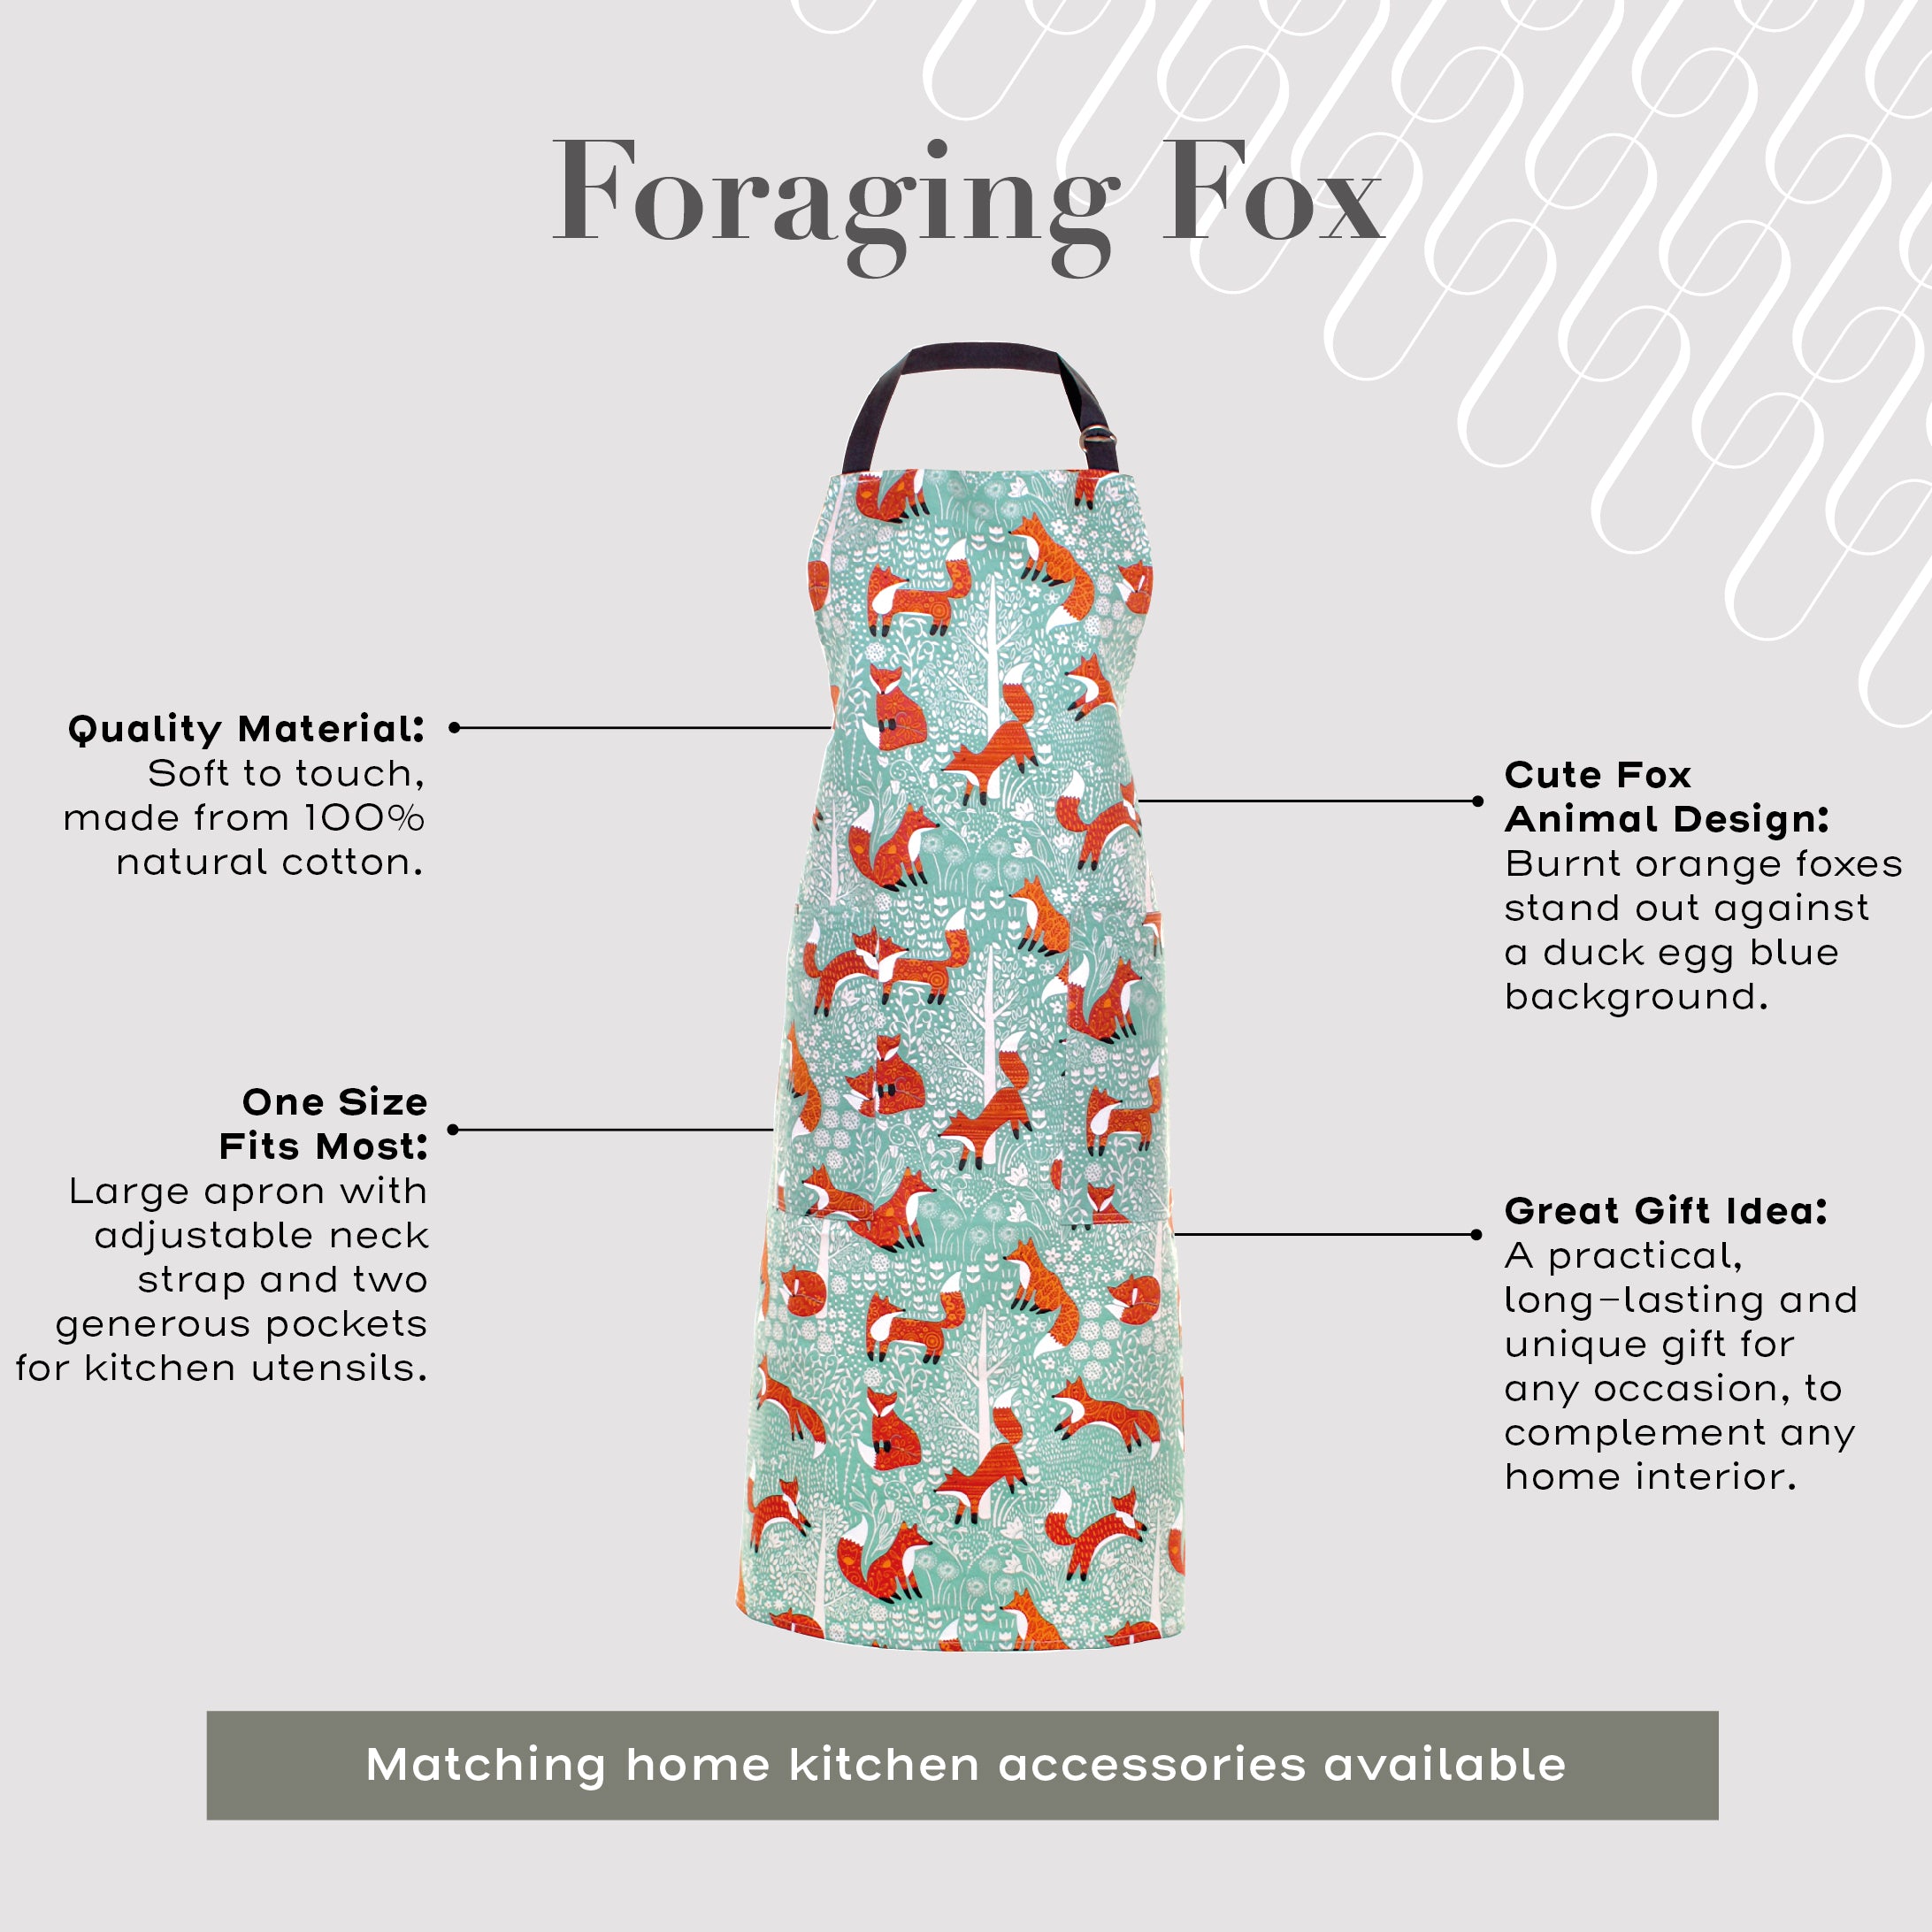 Ulster Weavers Cotton Apron - Foraging Fox (100% Cotton, Blue) - Apron - Ulster Weavers